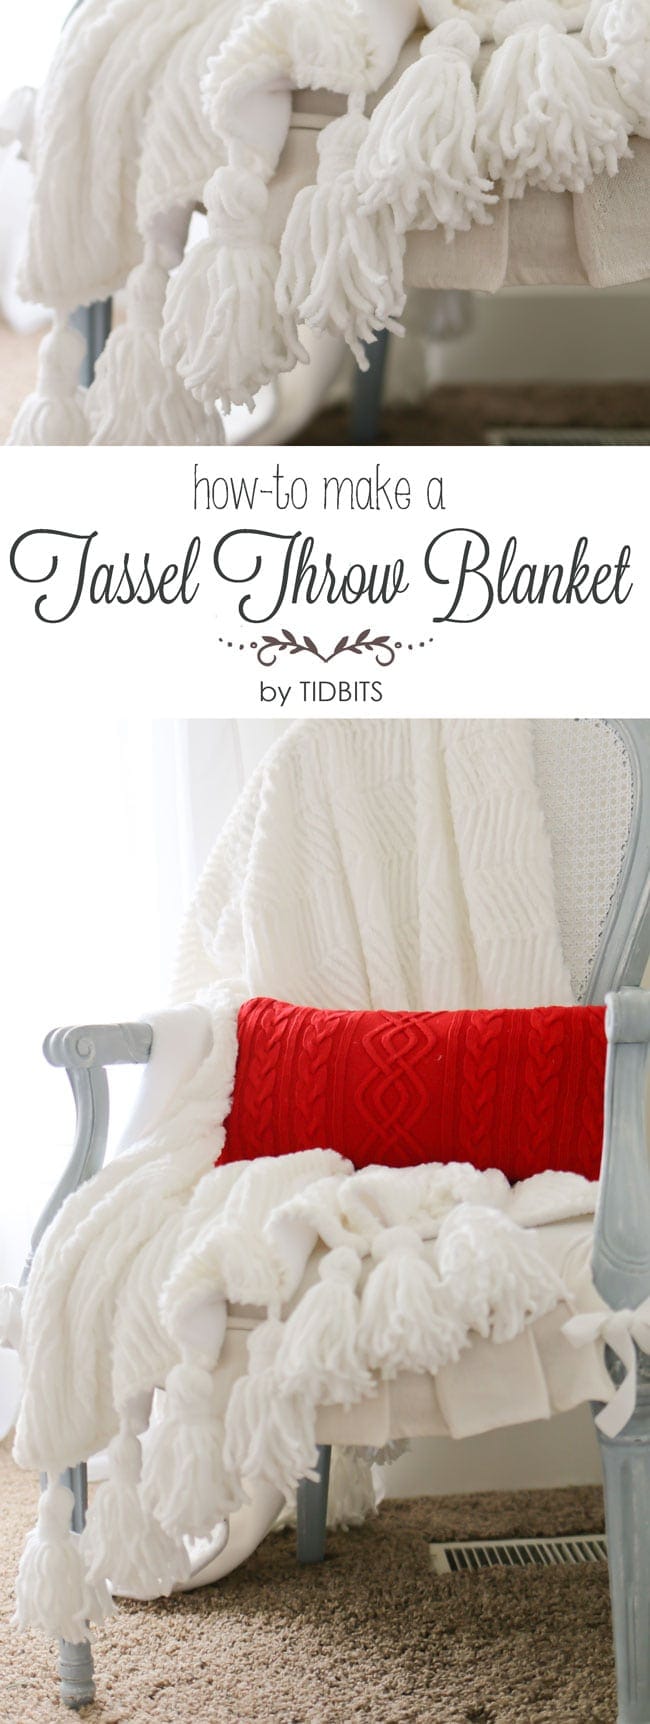 Tassel Throw Blanket DIY - Instructions for how to make your own tassels from yarn and how to sew them into fabric to make a one of a kind throw blanket.